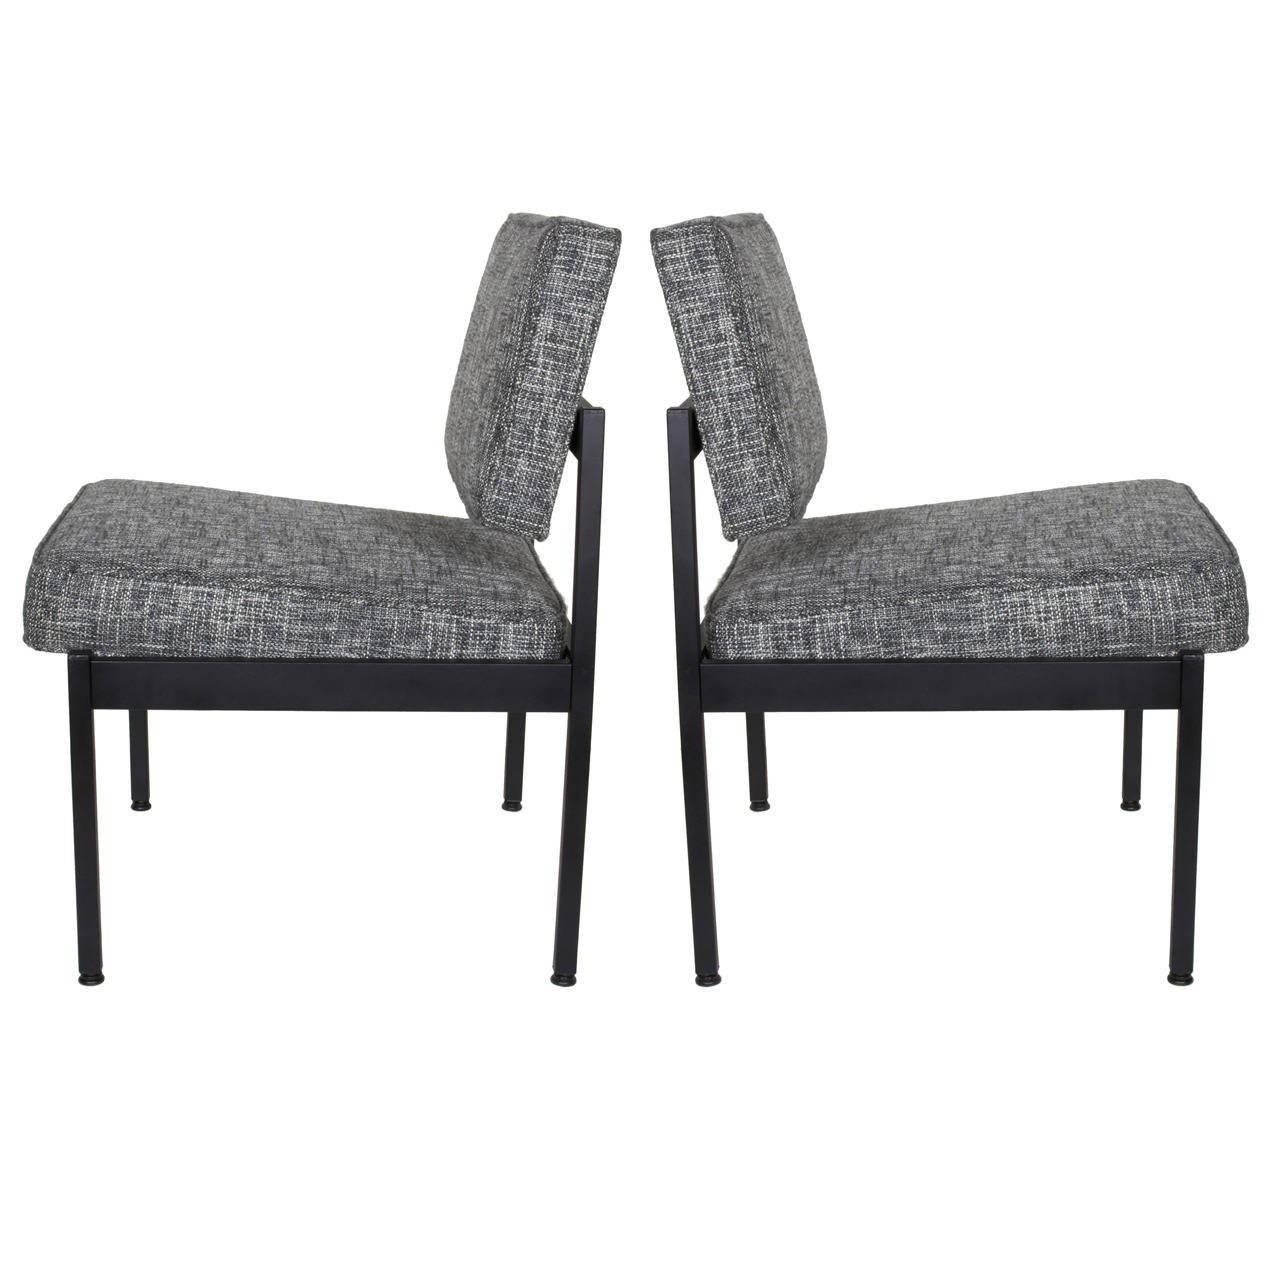 Pair of Mid-Century Modern Easy Chairs in the Style of Florence Knoll